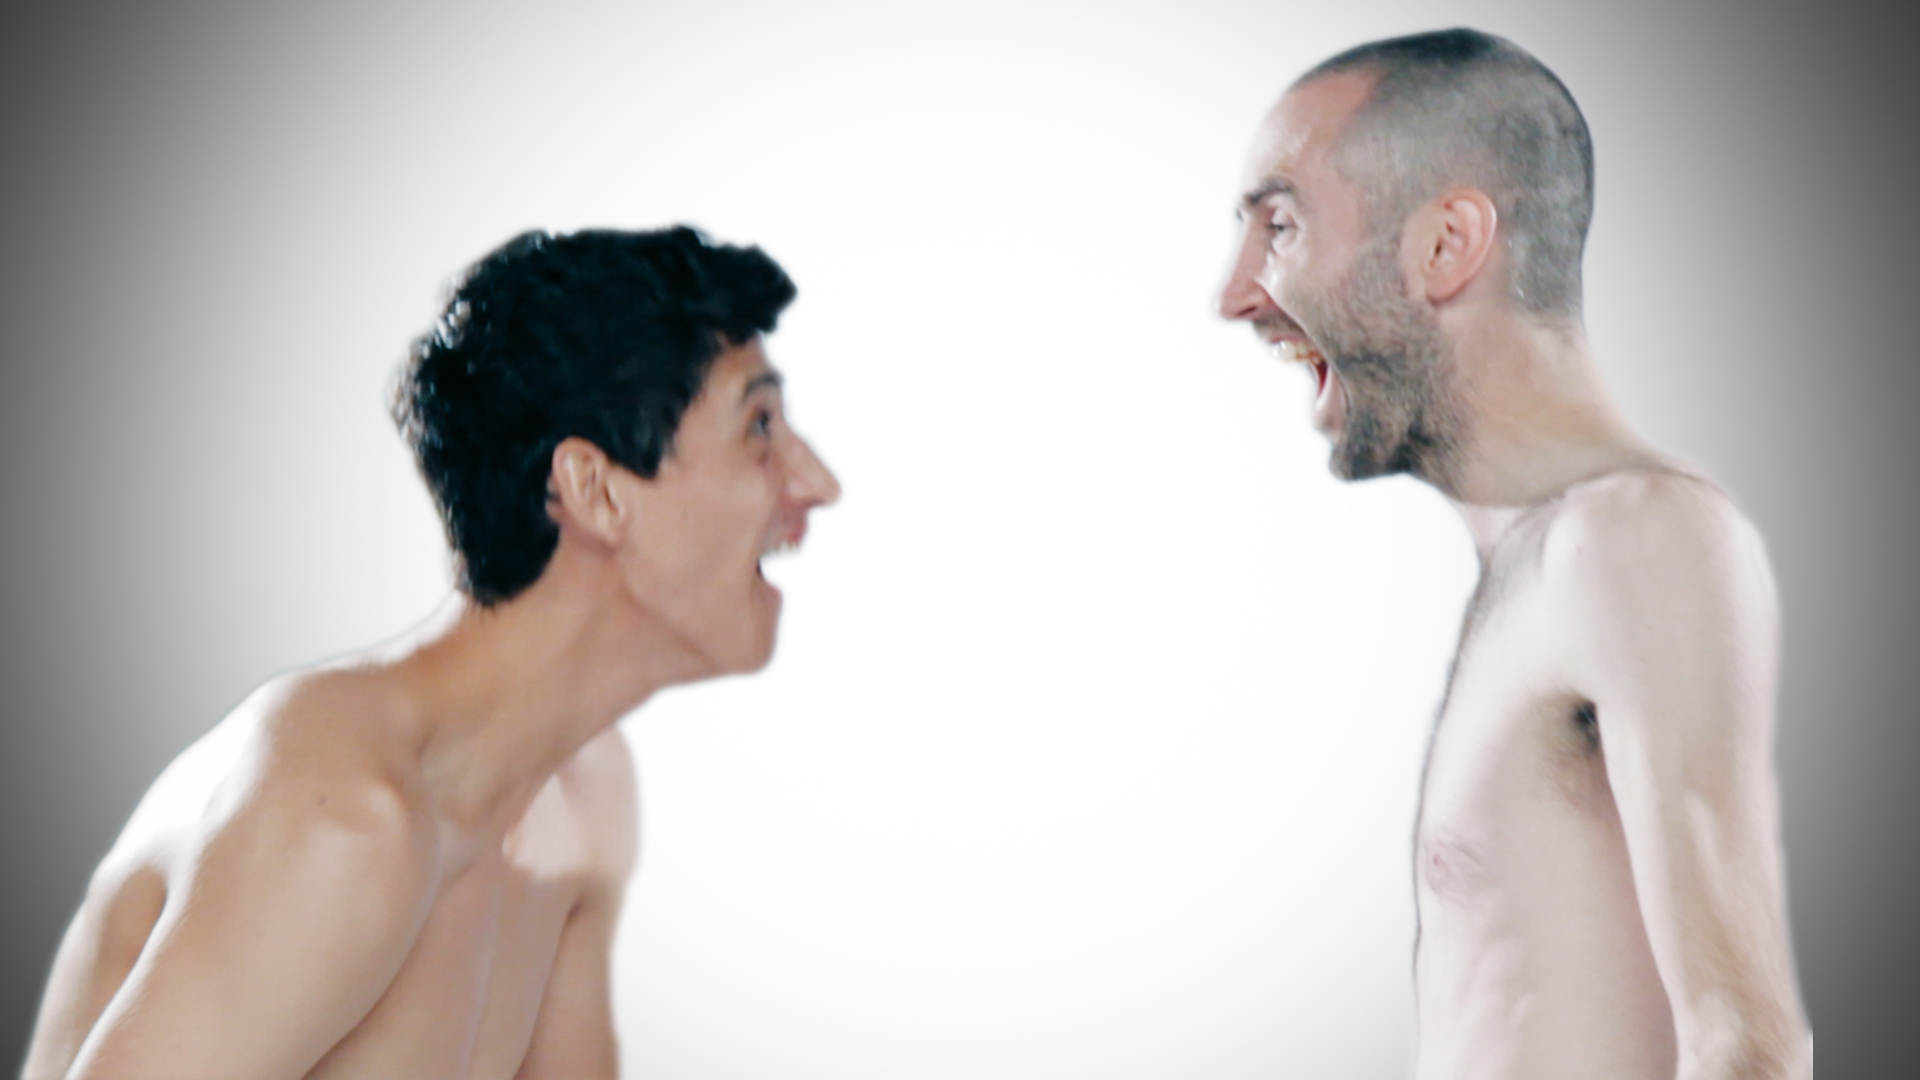 Guy Friends See Each Other Naked (Prank). 